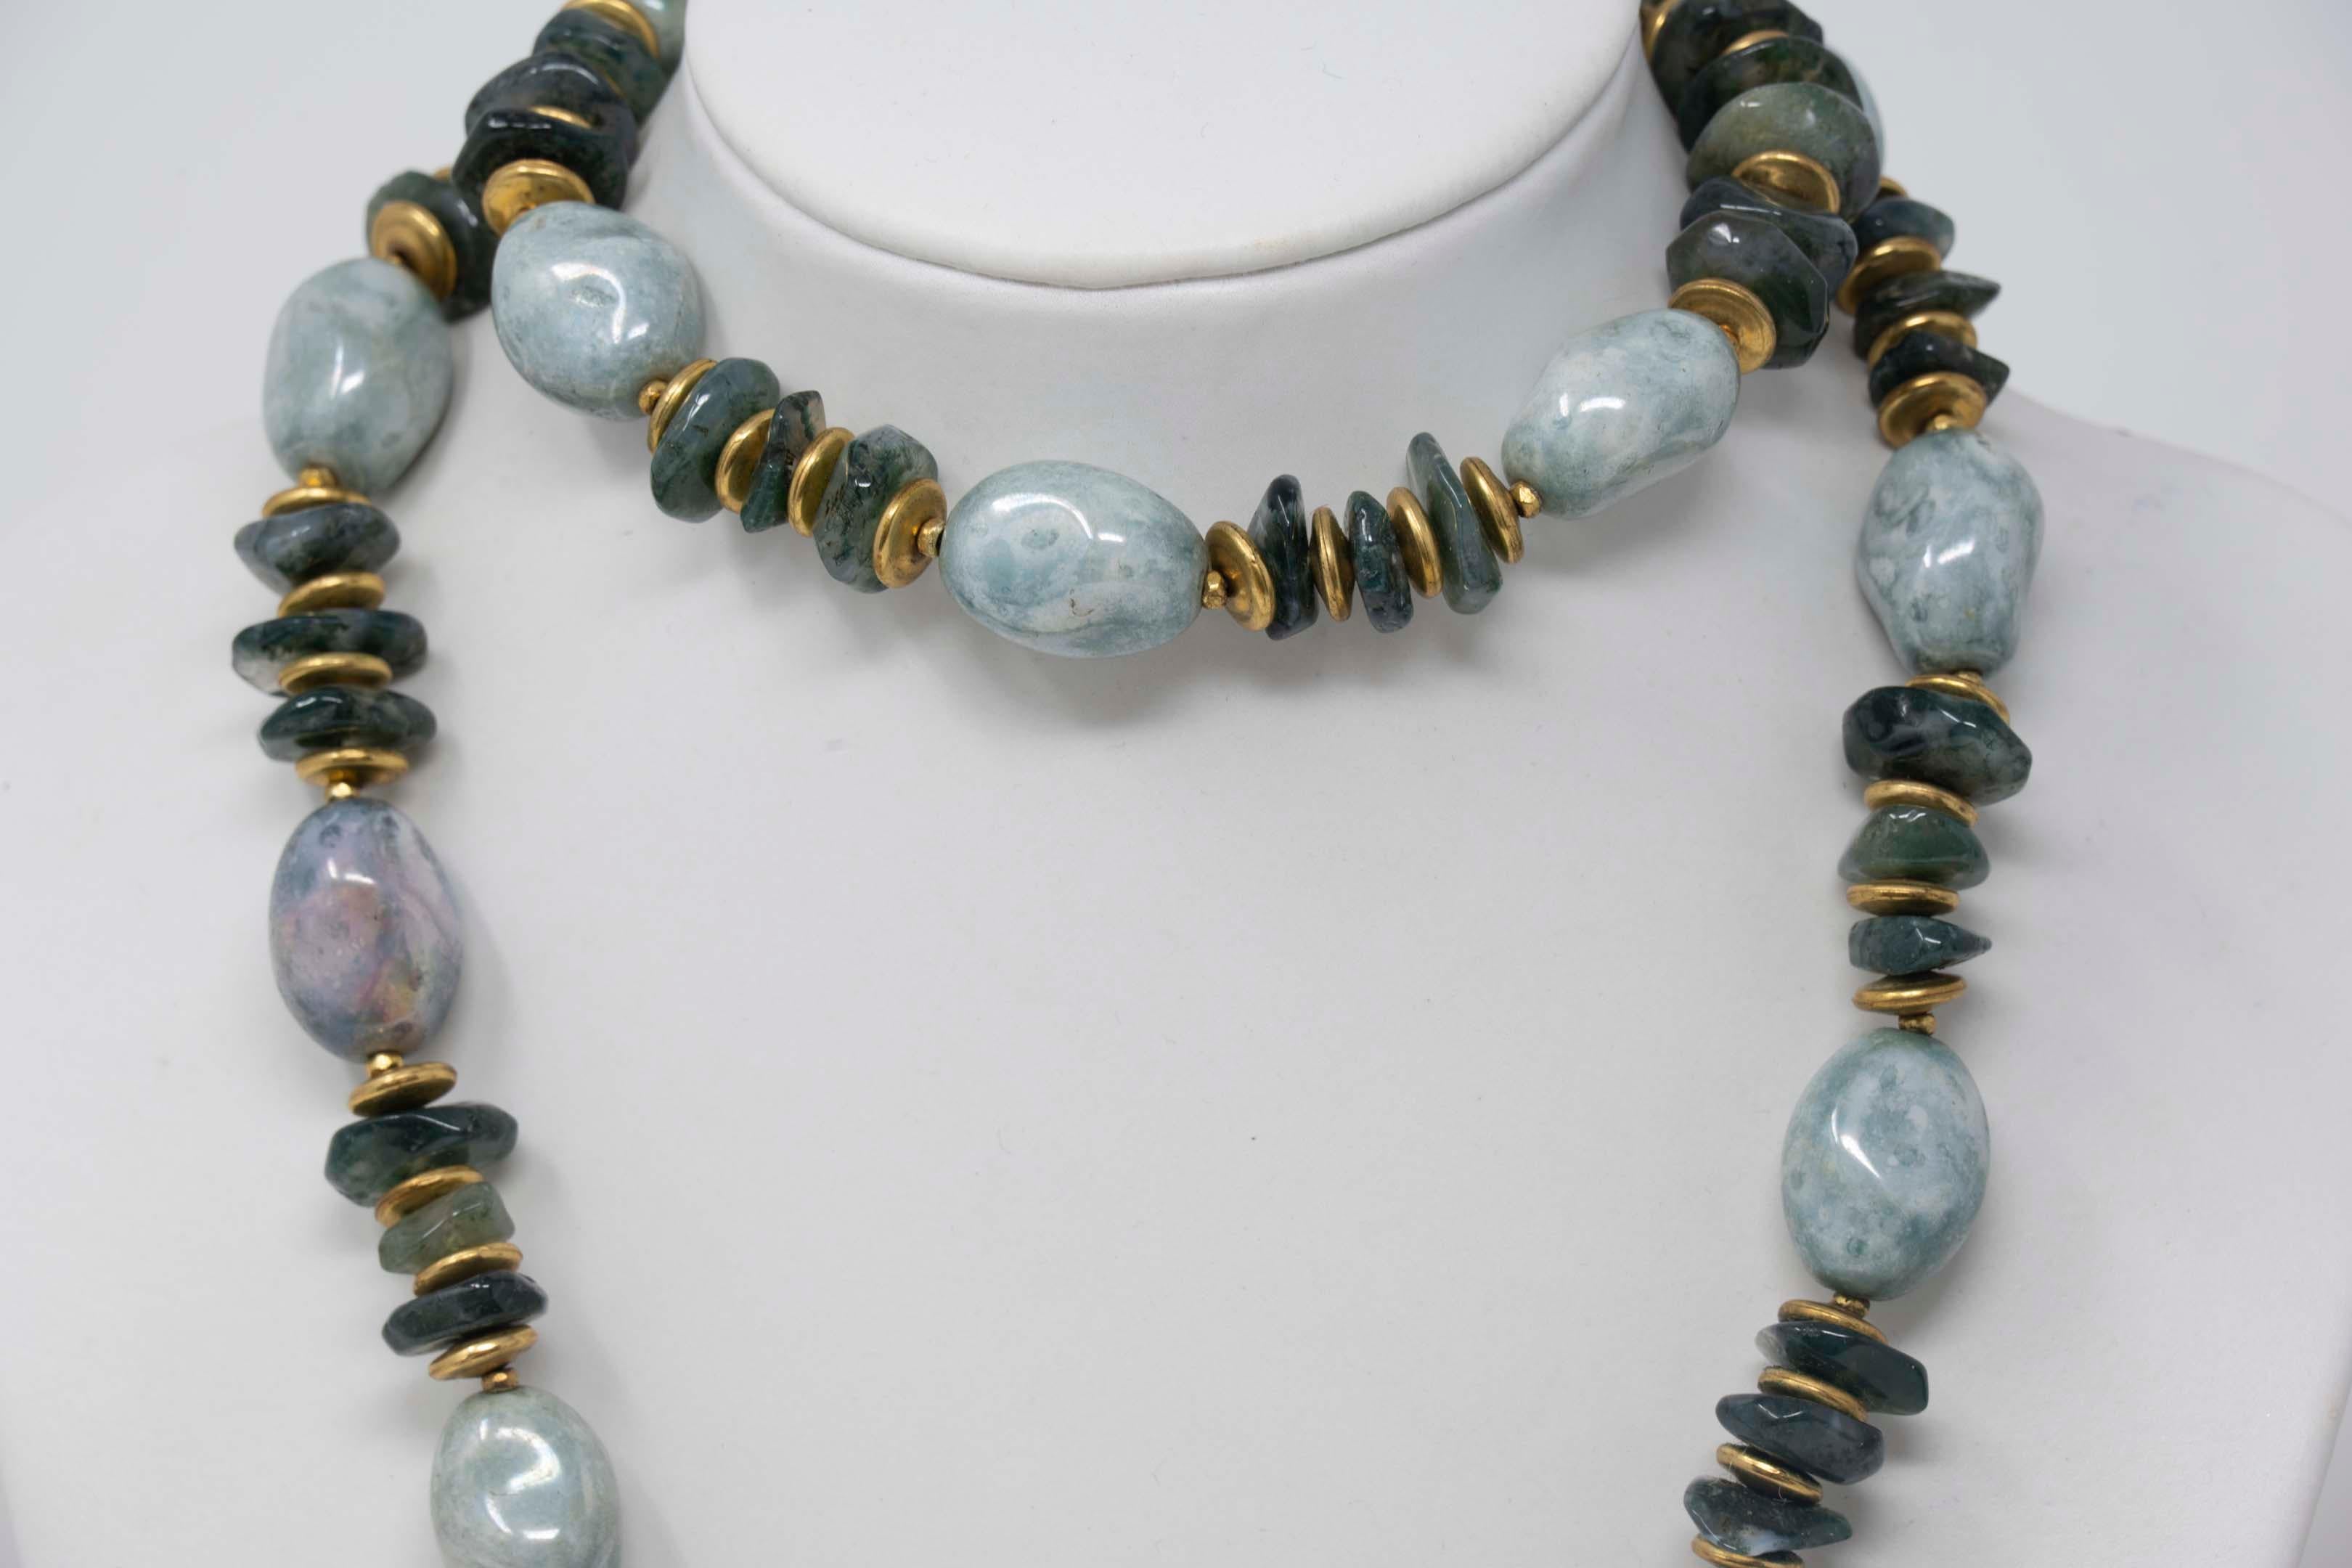 Vintage Miriam Haskell necklace with gilt metal and semi precious stones. The necklace measures 28 inches long x .5 inches in width, Made in USA 1950, In good condition.
